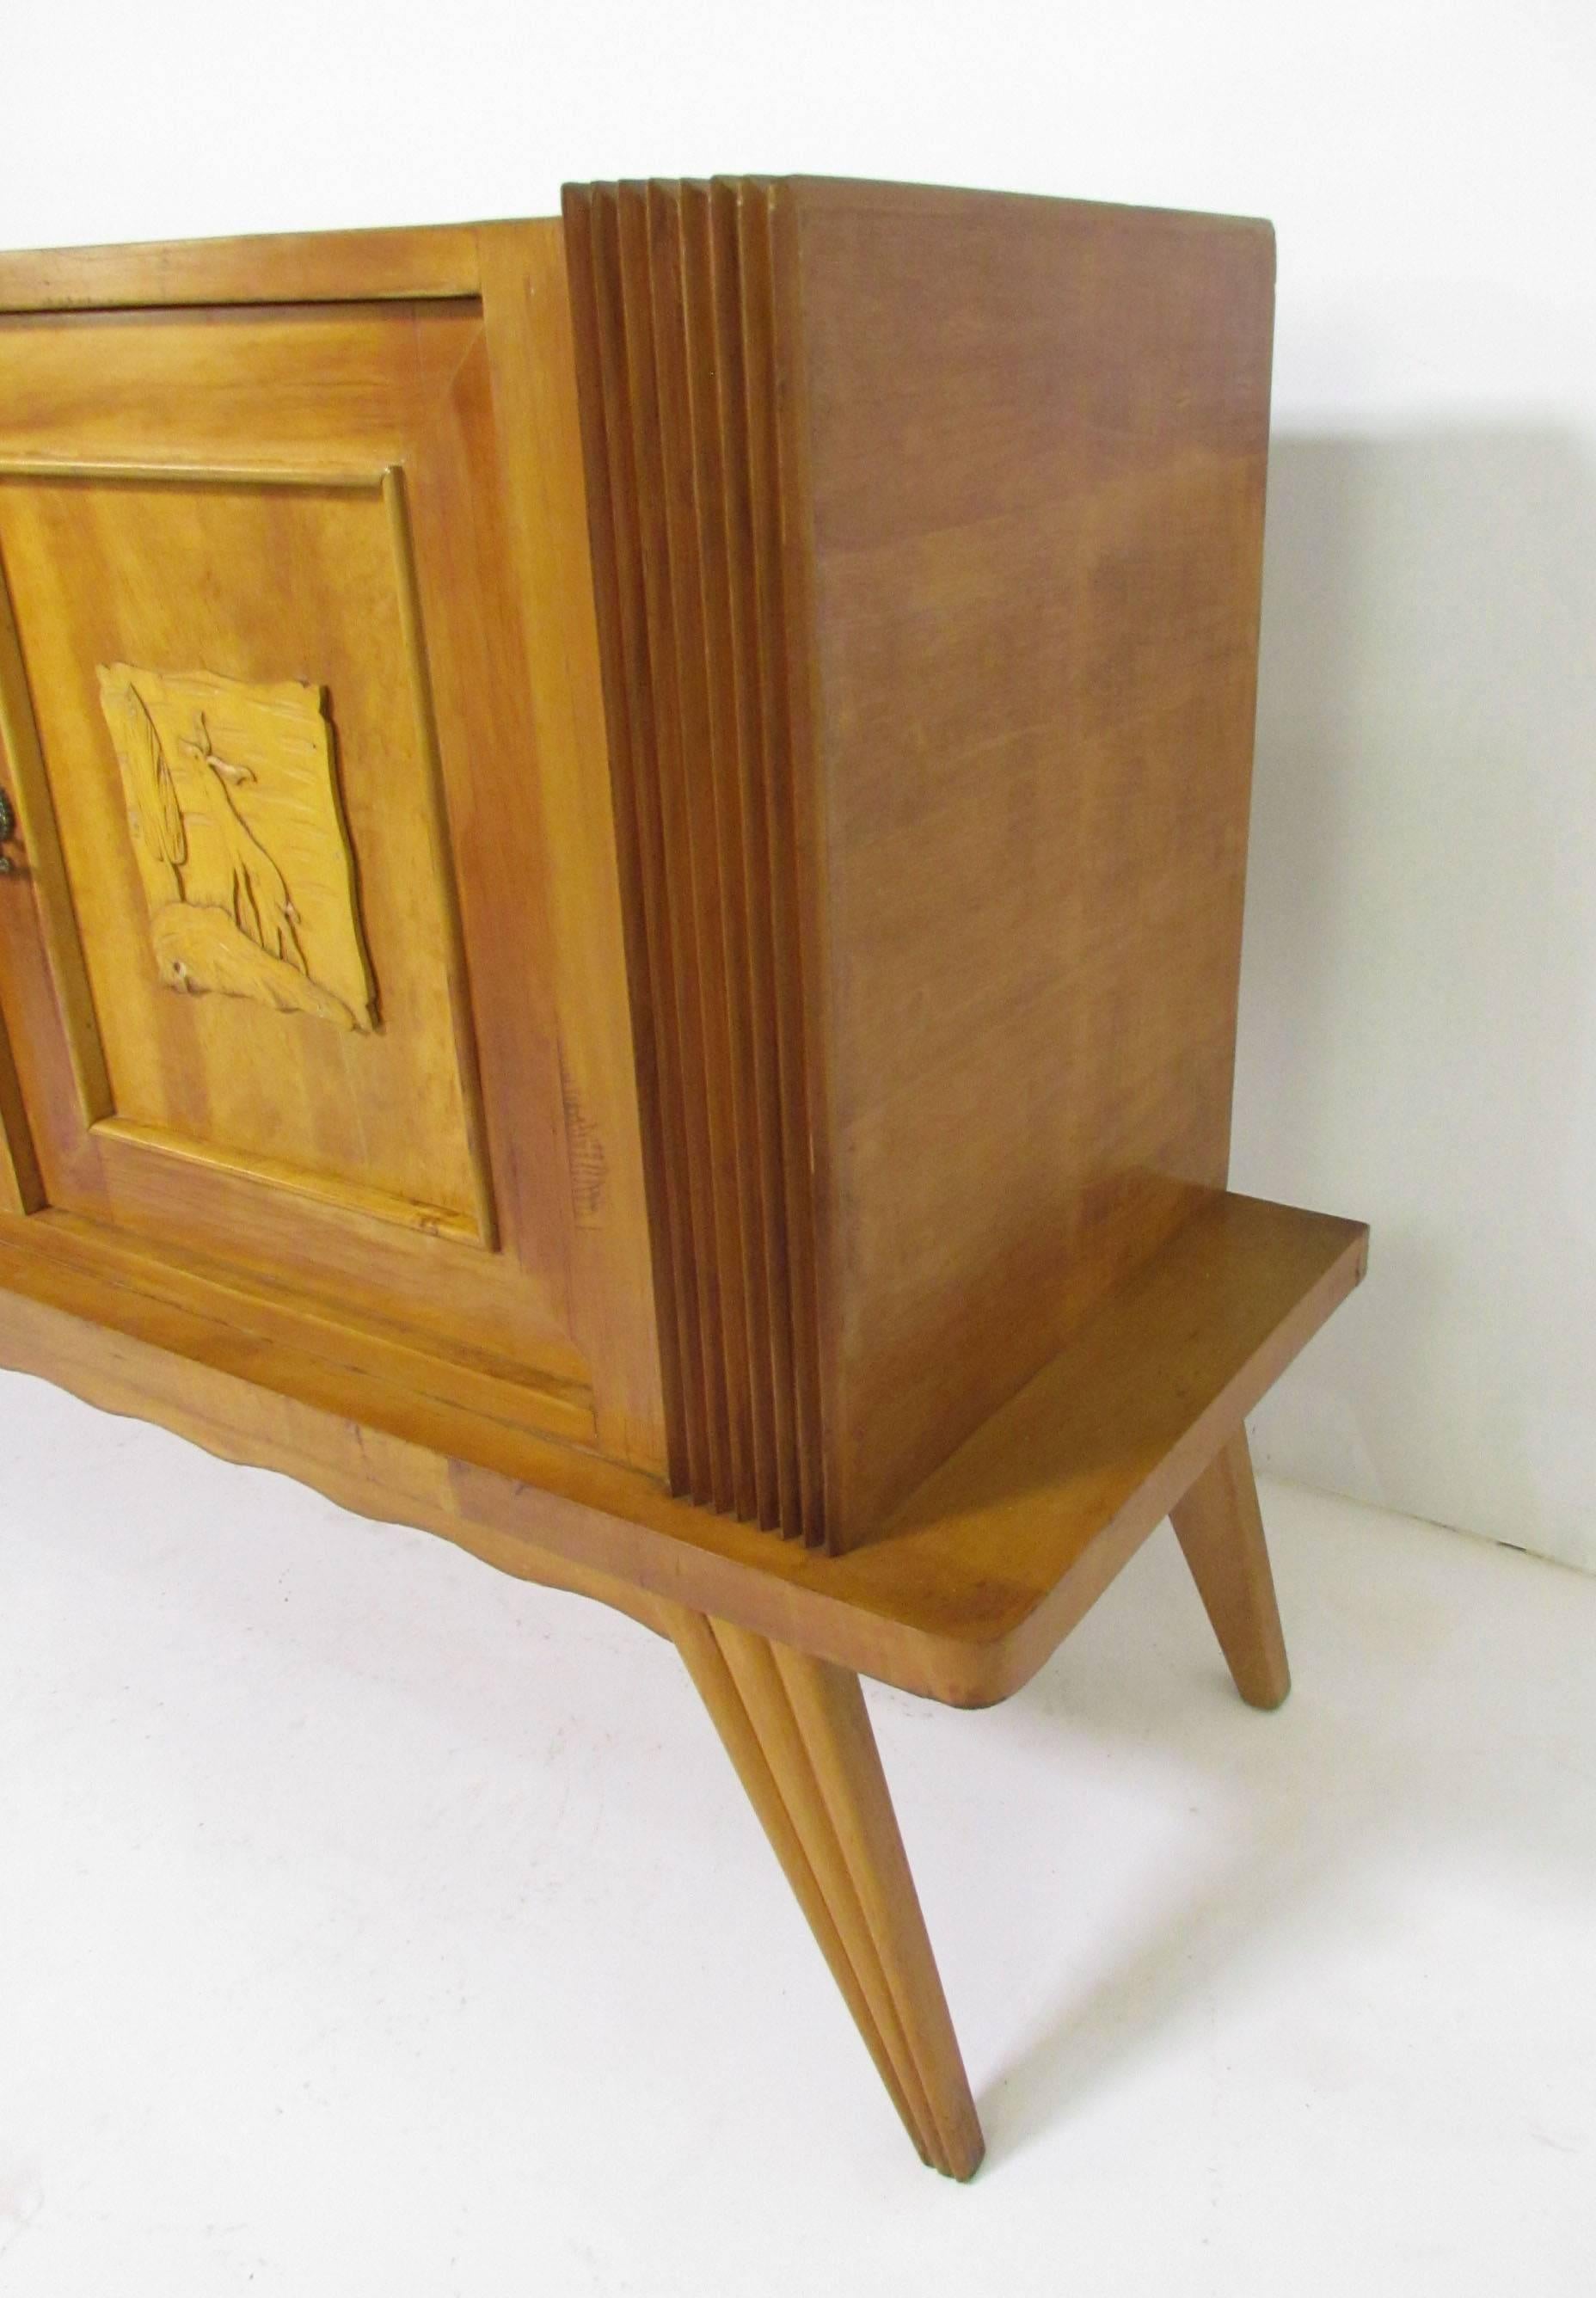 Italian Art Deco Sideboard with Hand-Carved Decorative Panels, circa 1940s 2